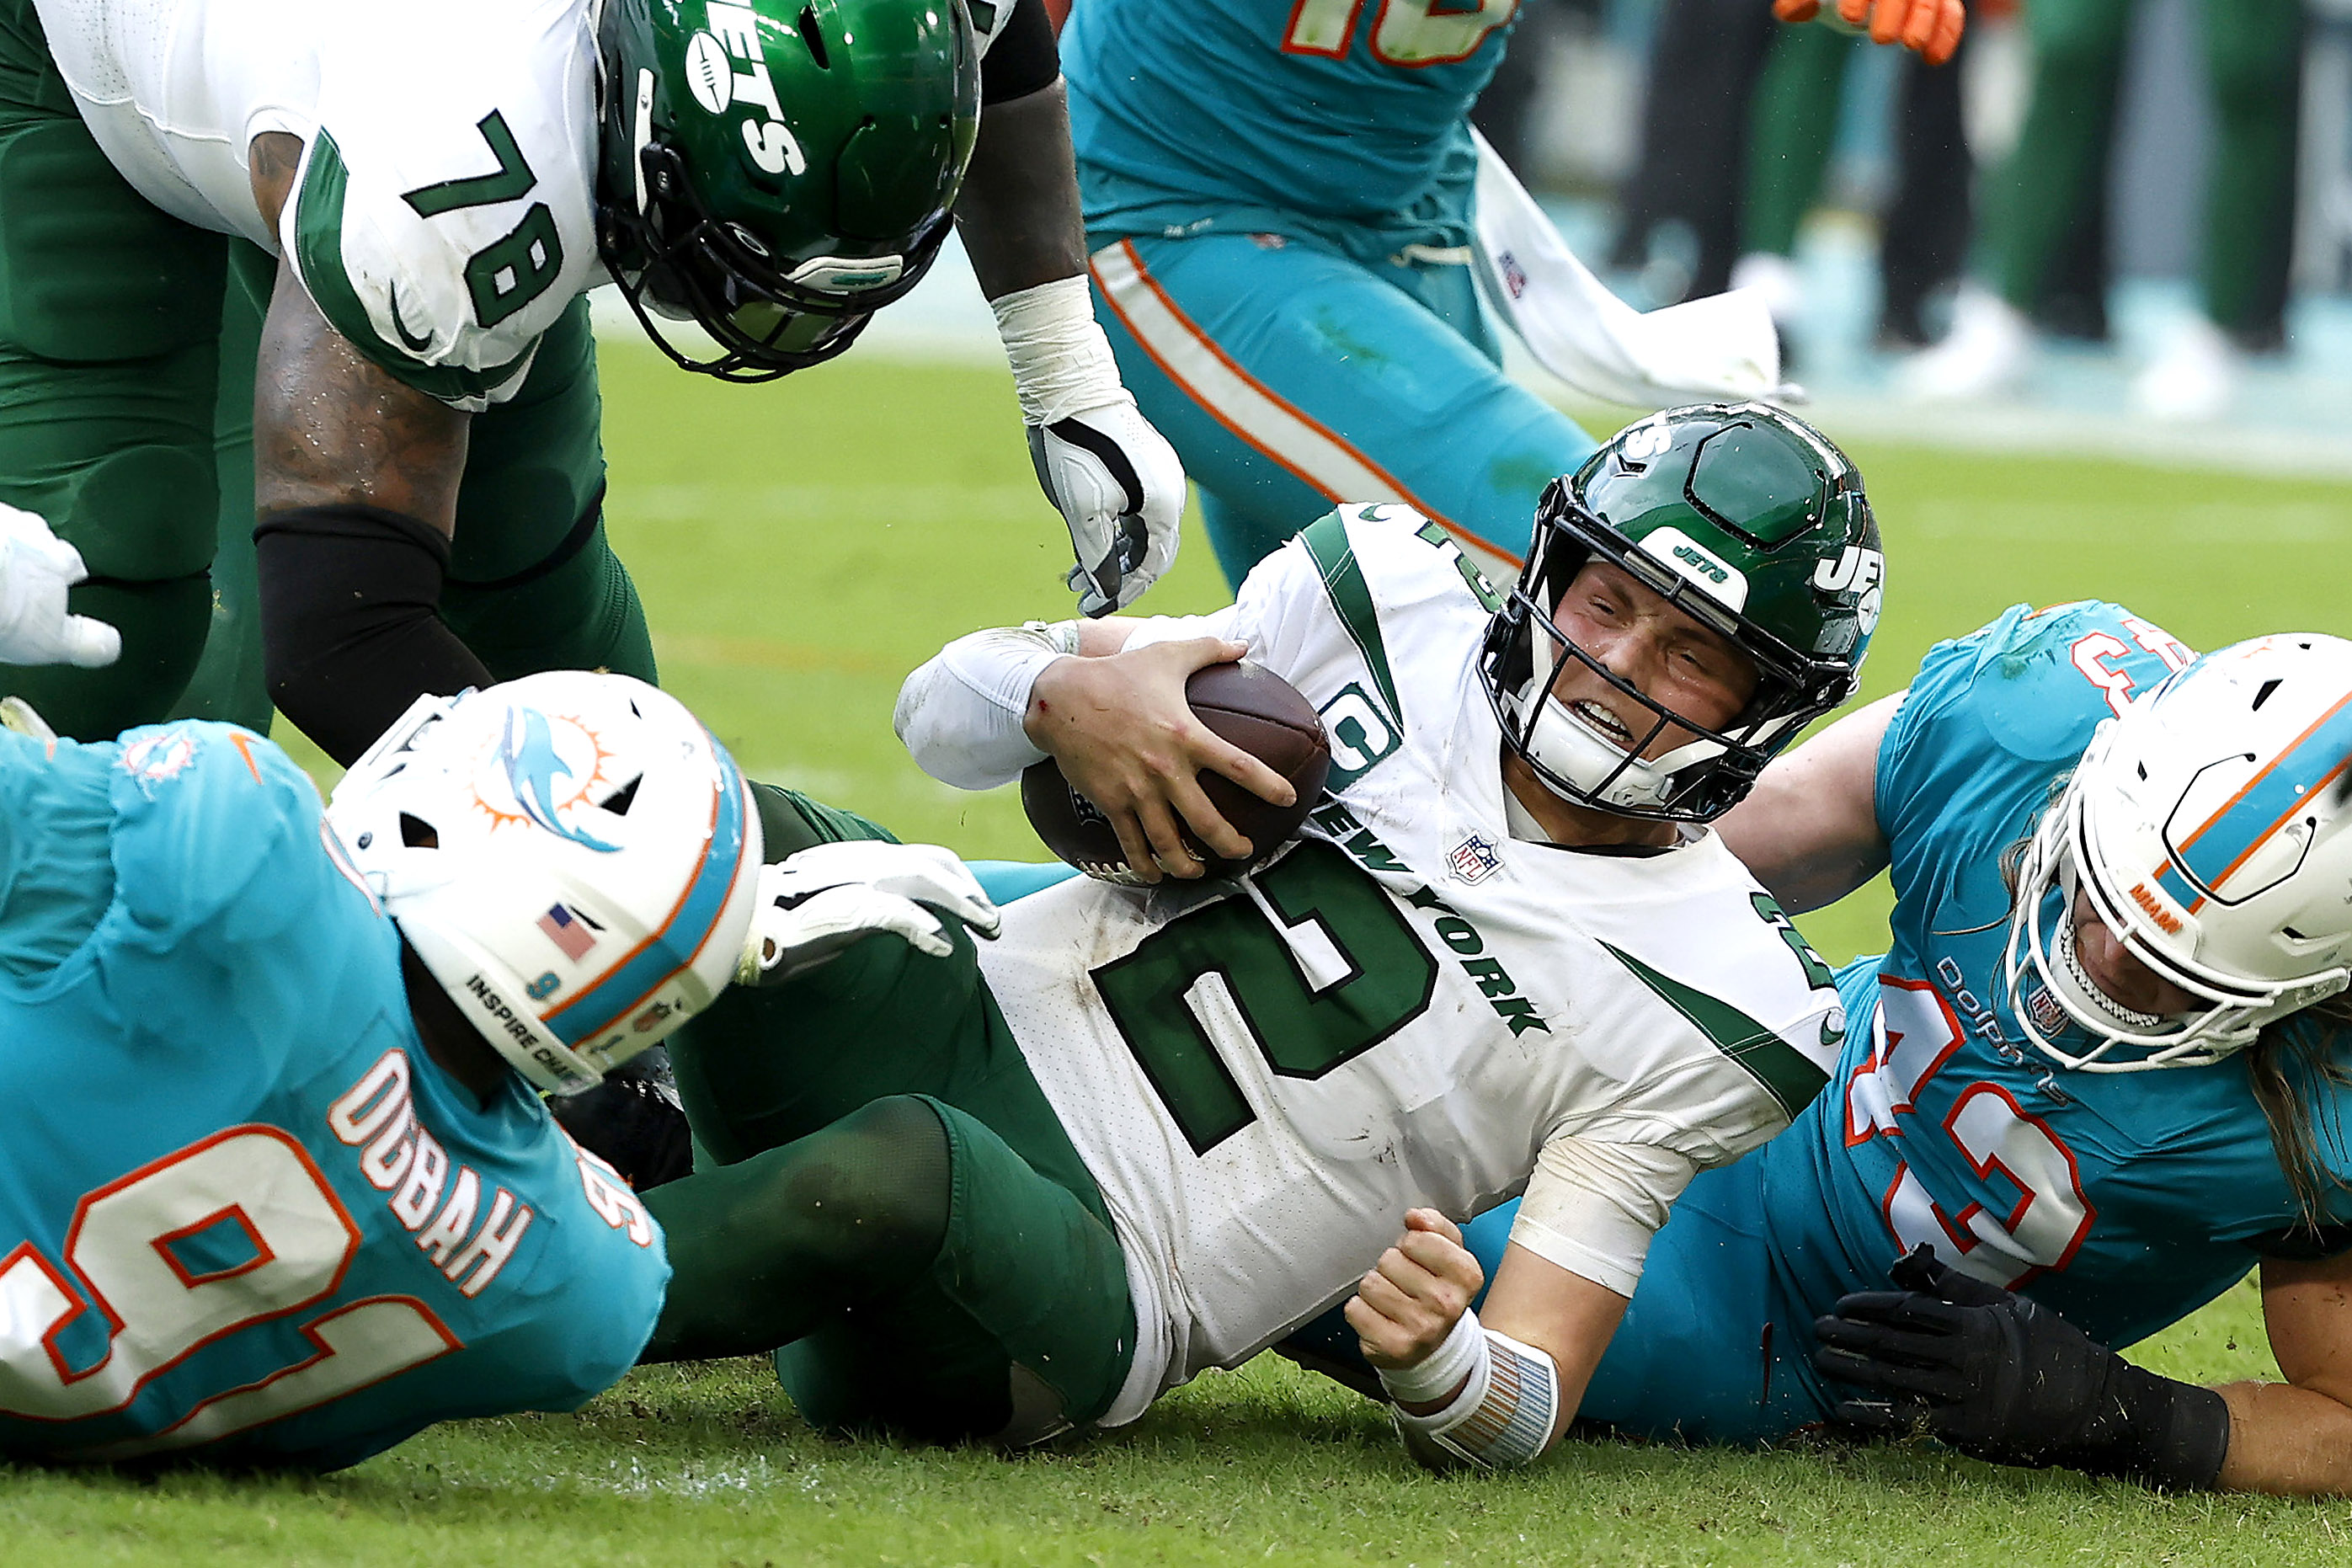 Zach Wilson gets sacked against the Dolphins